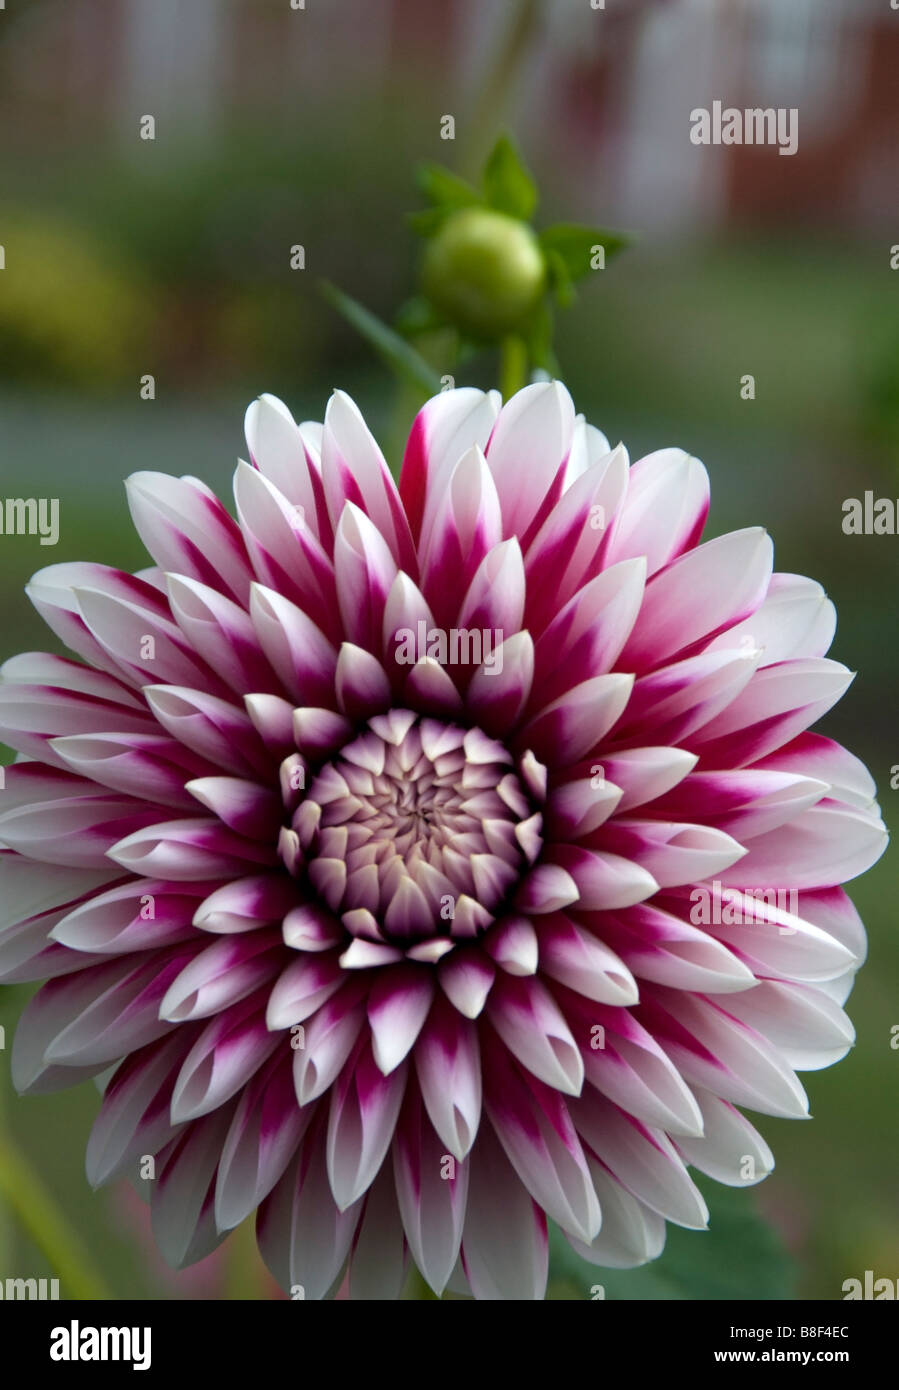 A purple grand dahlia flower in a garden in a vertical format.  Selective focus with a blurred background - a red barn is out of focus. Stock Photo